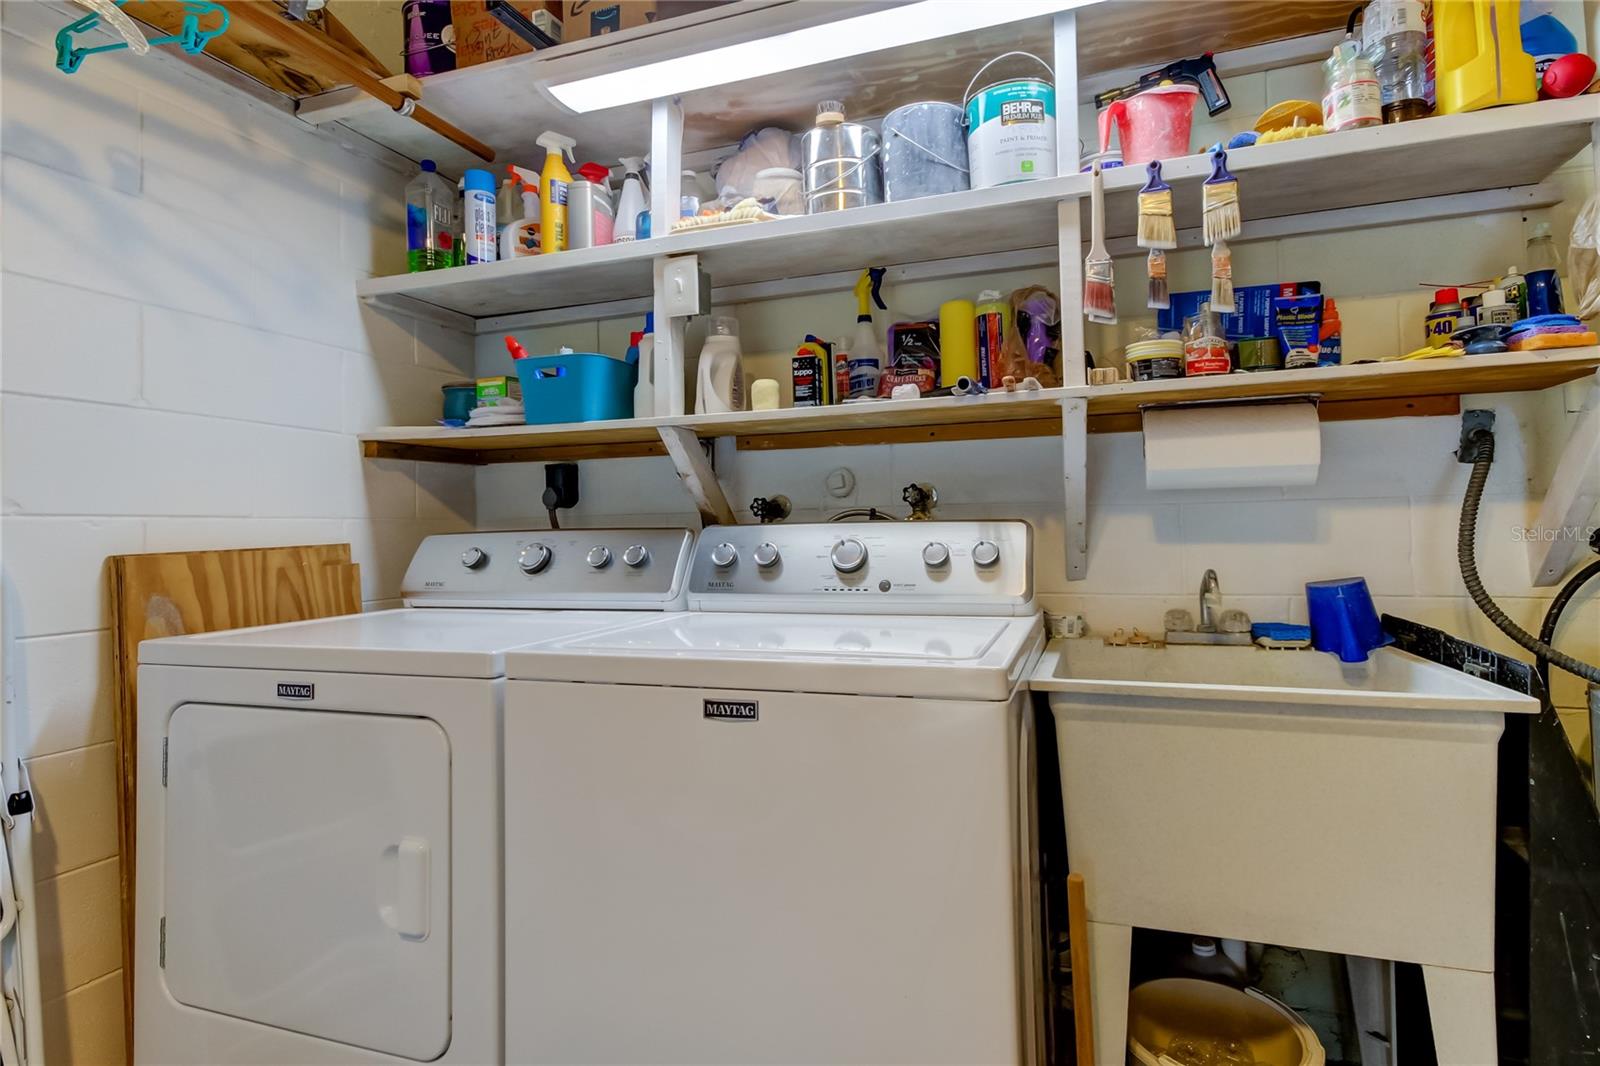 Laundry Area in Garage Features NEW Maytag Washer & Dryer (2023) - Included!